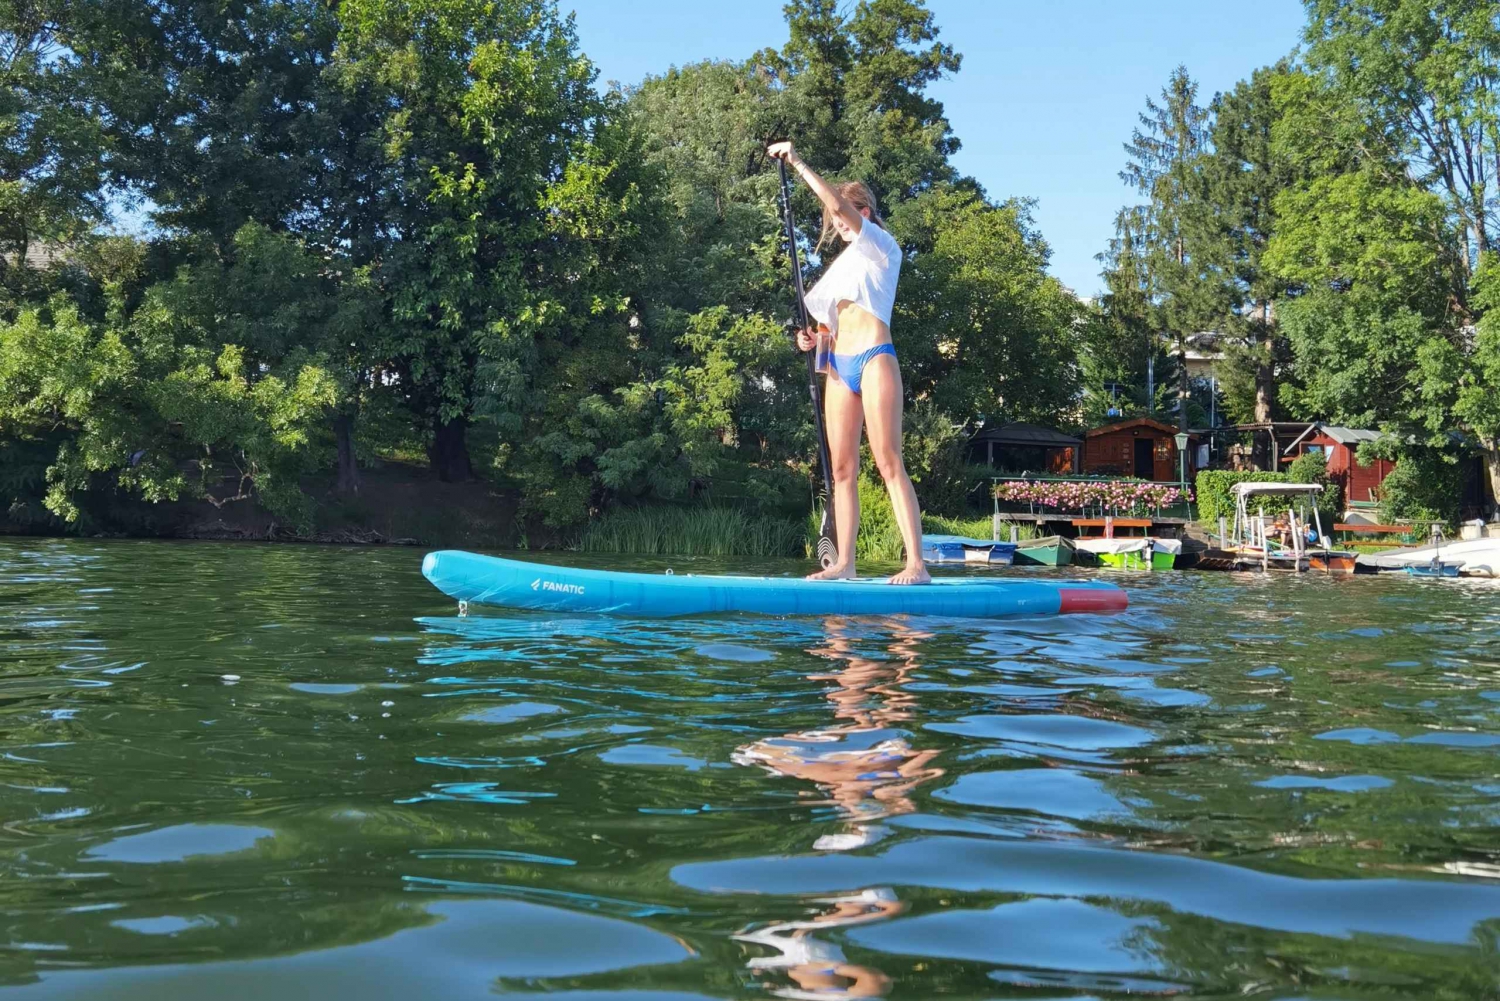 Vienna: Stand-Up Paddleboard Rental on the Old Danube